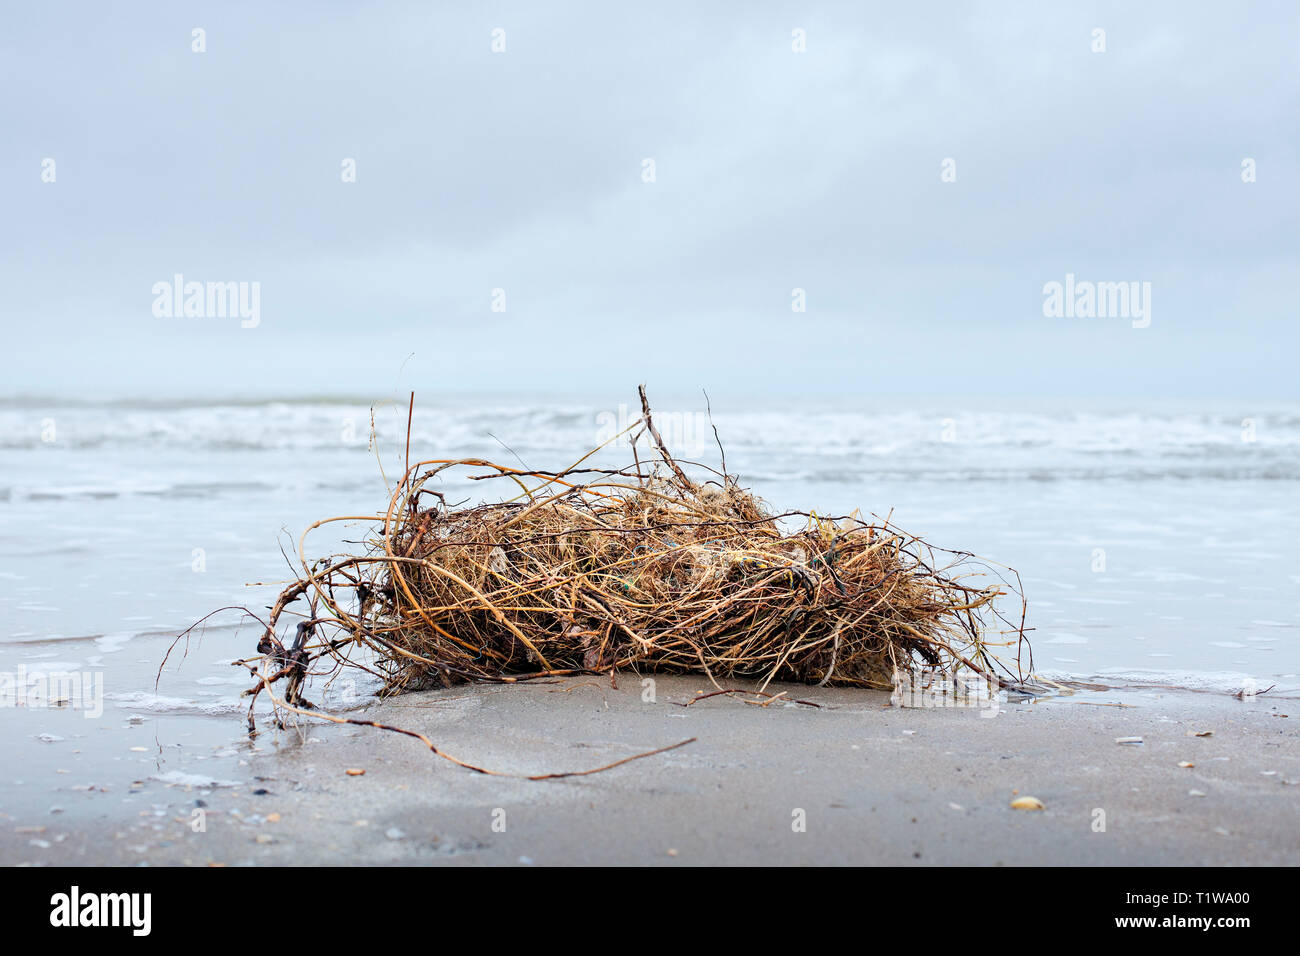 Bundle of seaweed mixed with plastic washed up on the shore Stock Photo